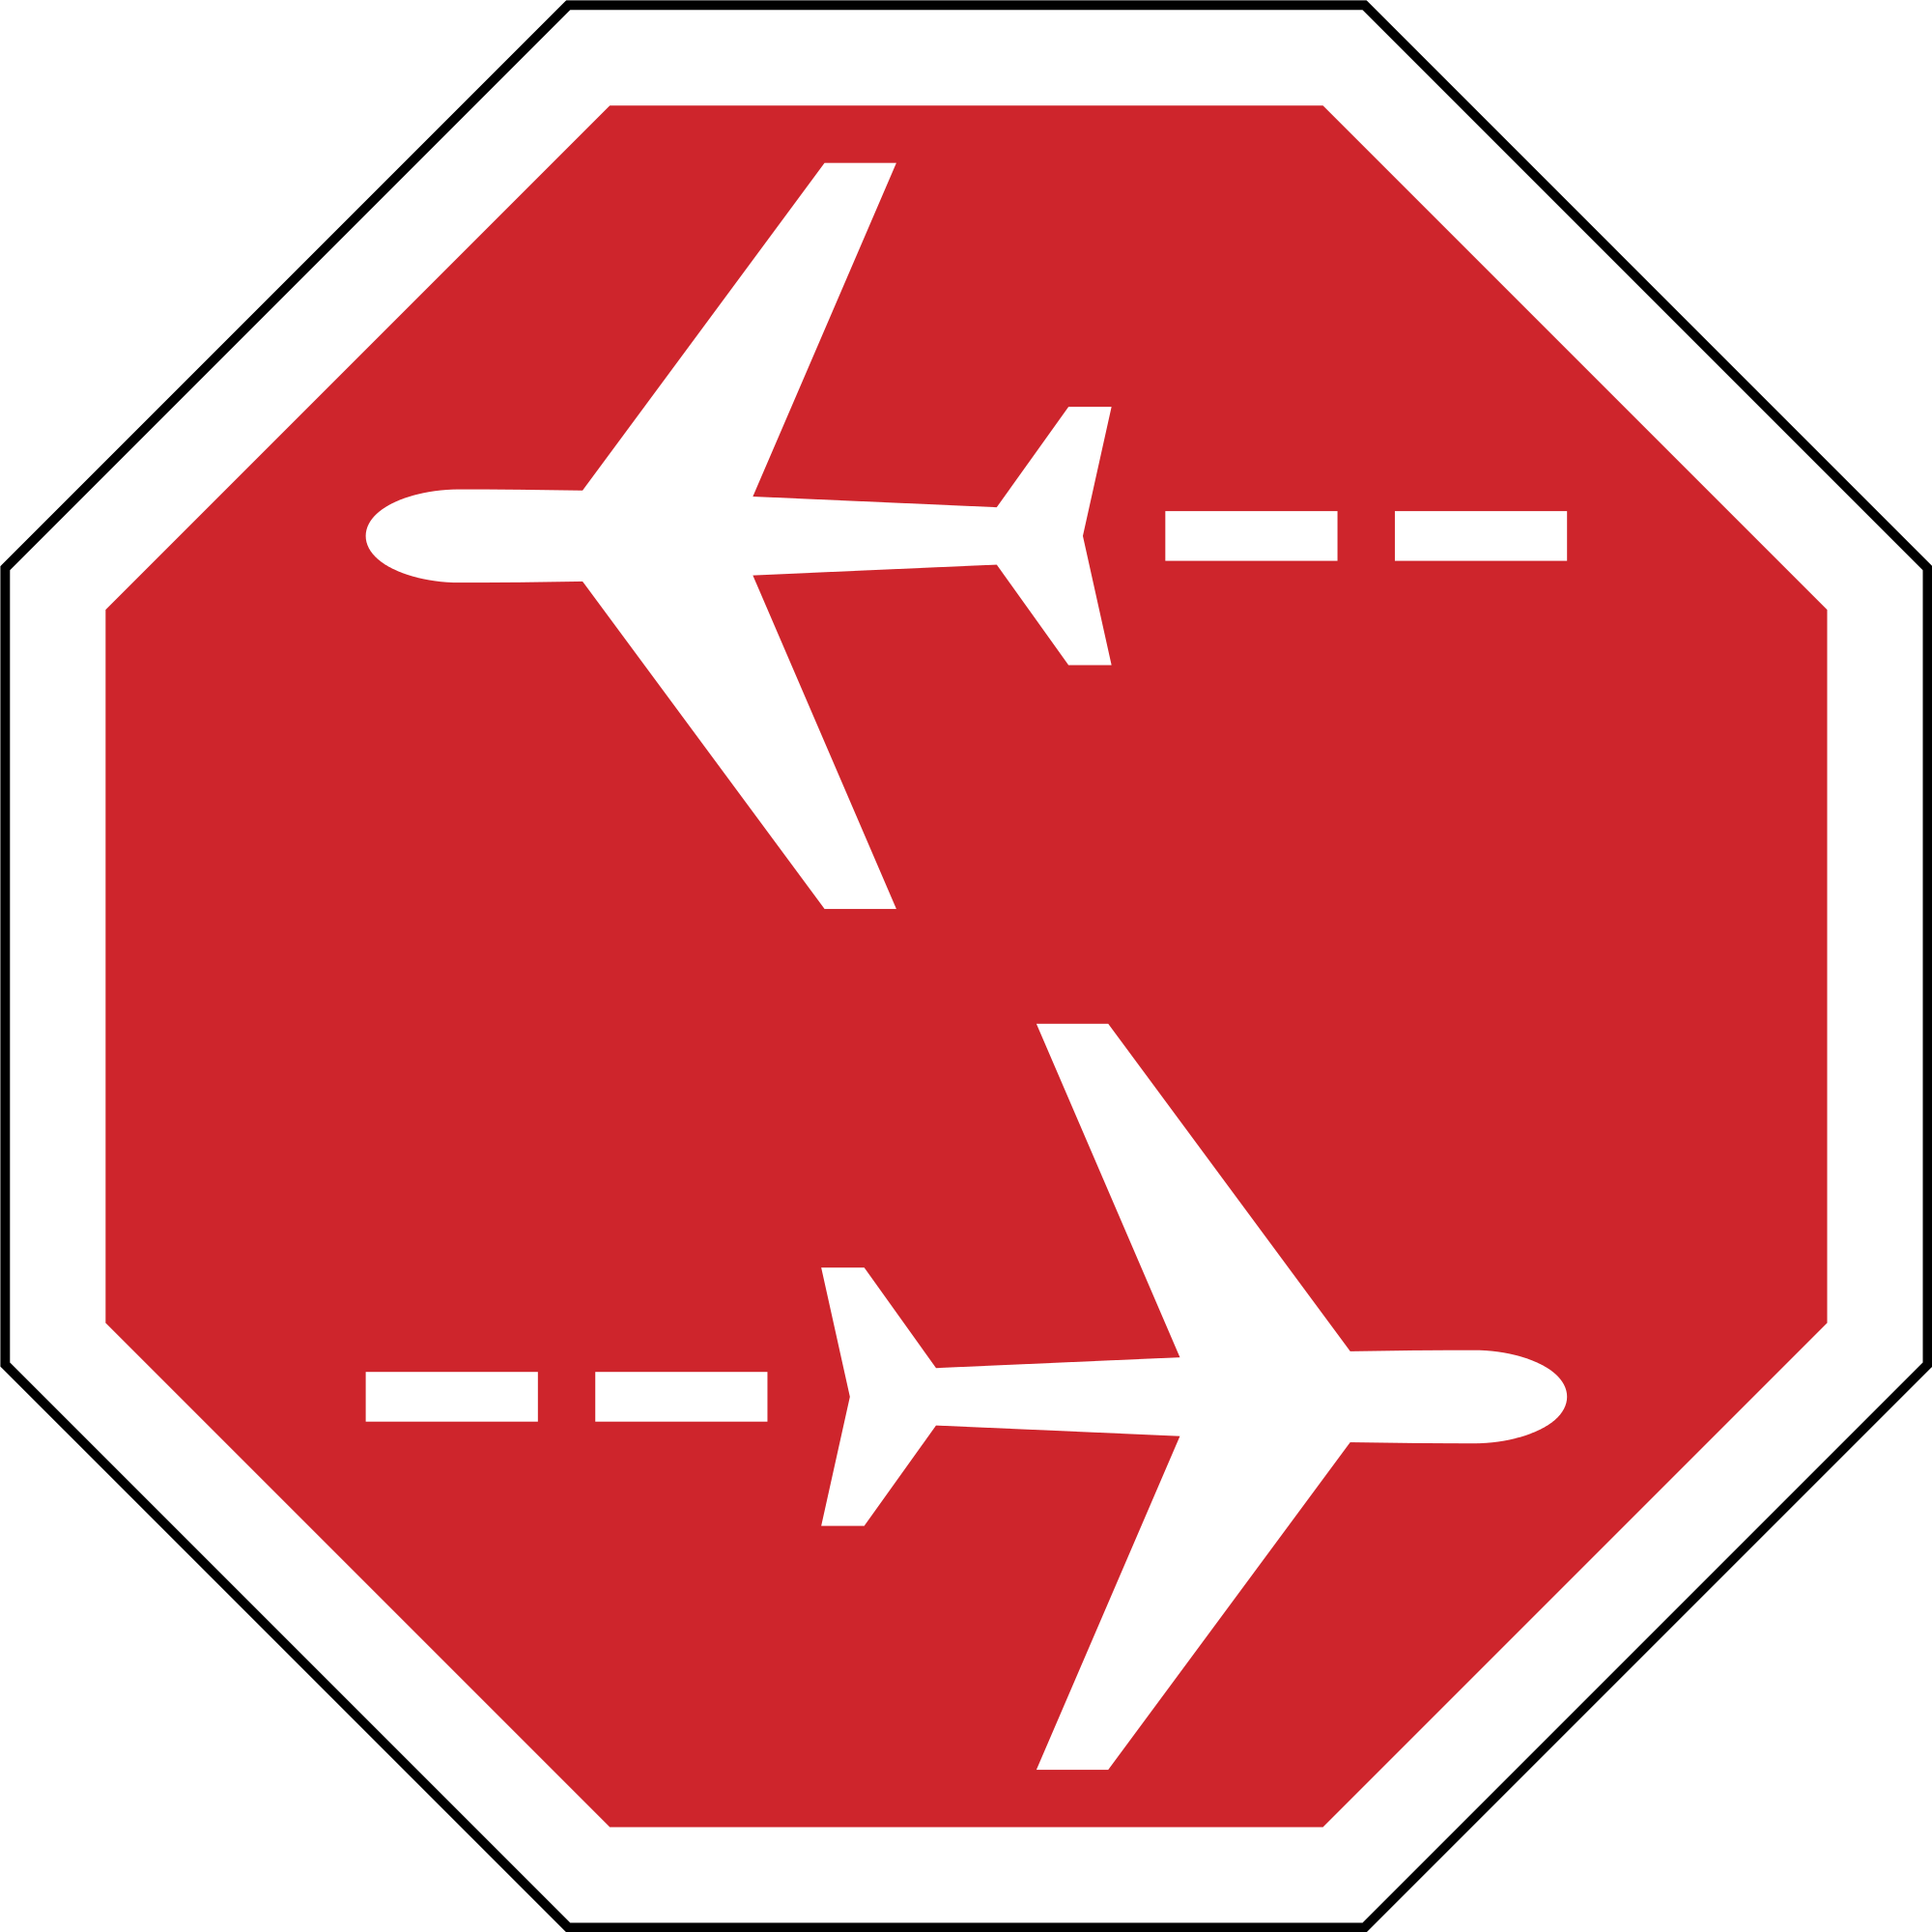 File:Airport stop sign (type 1).svg - Wikimedia Commons